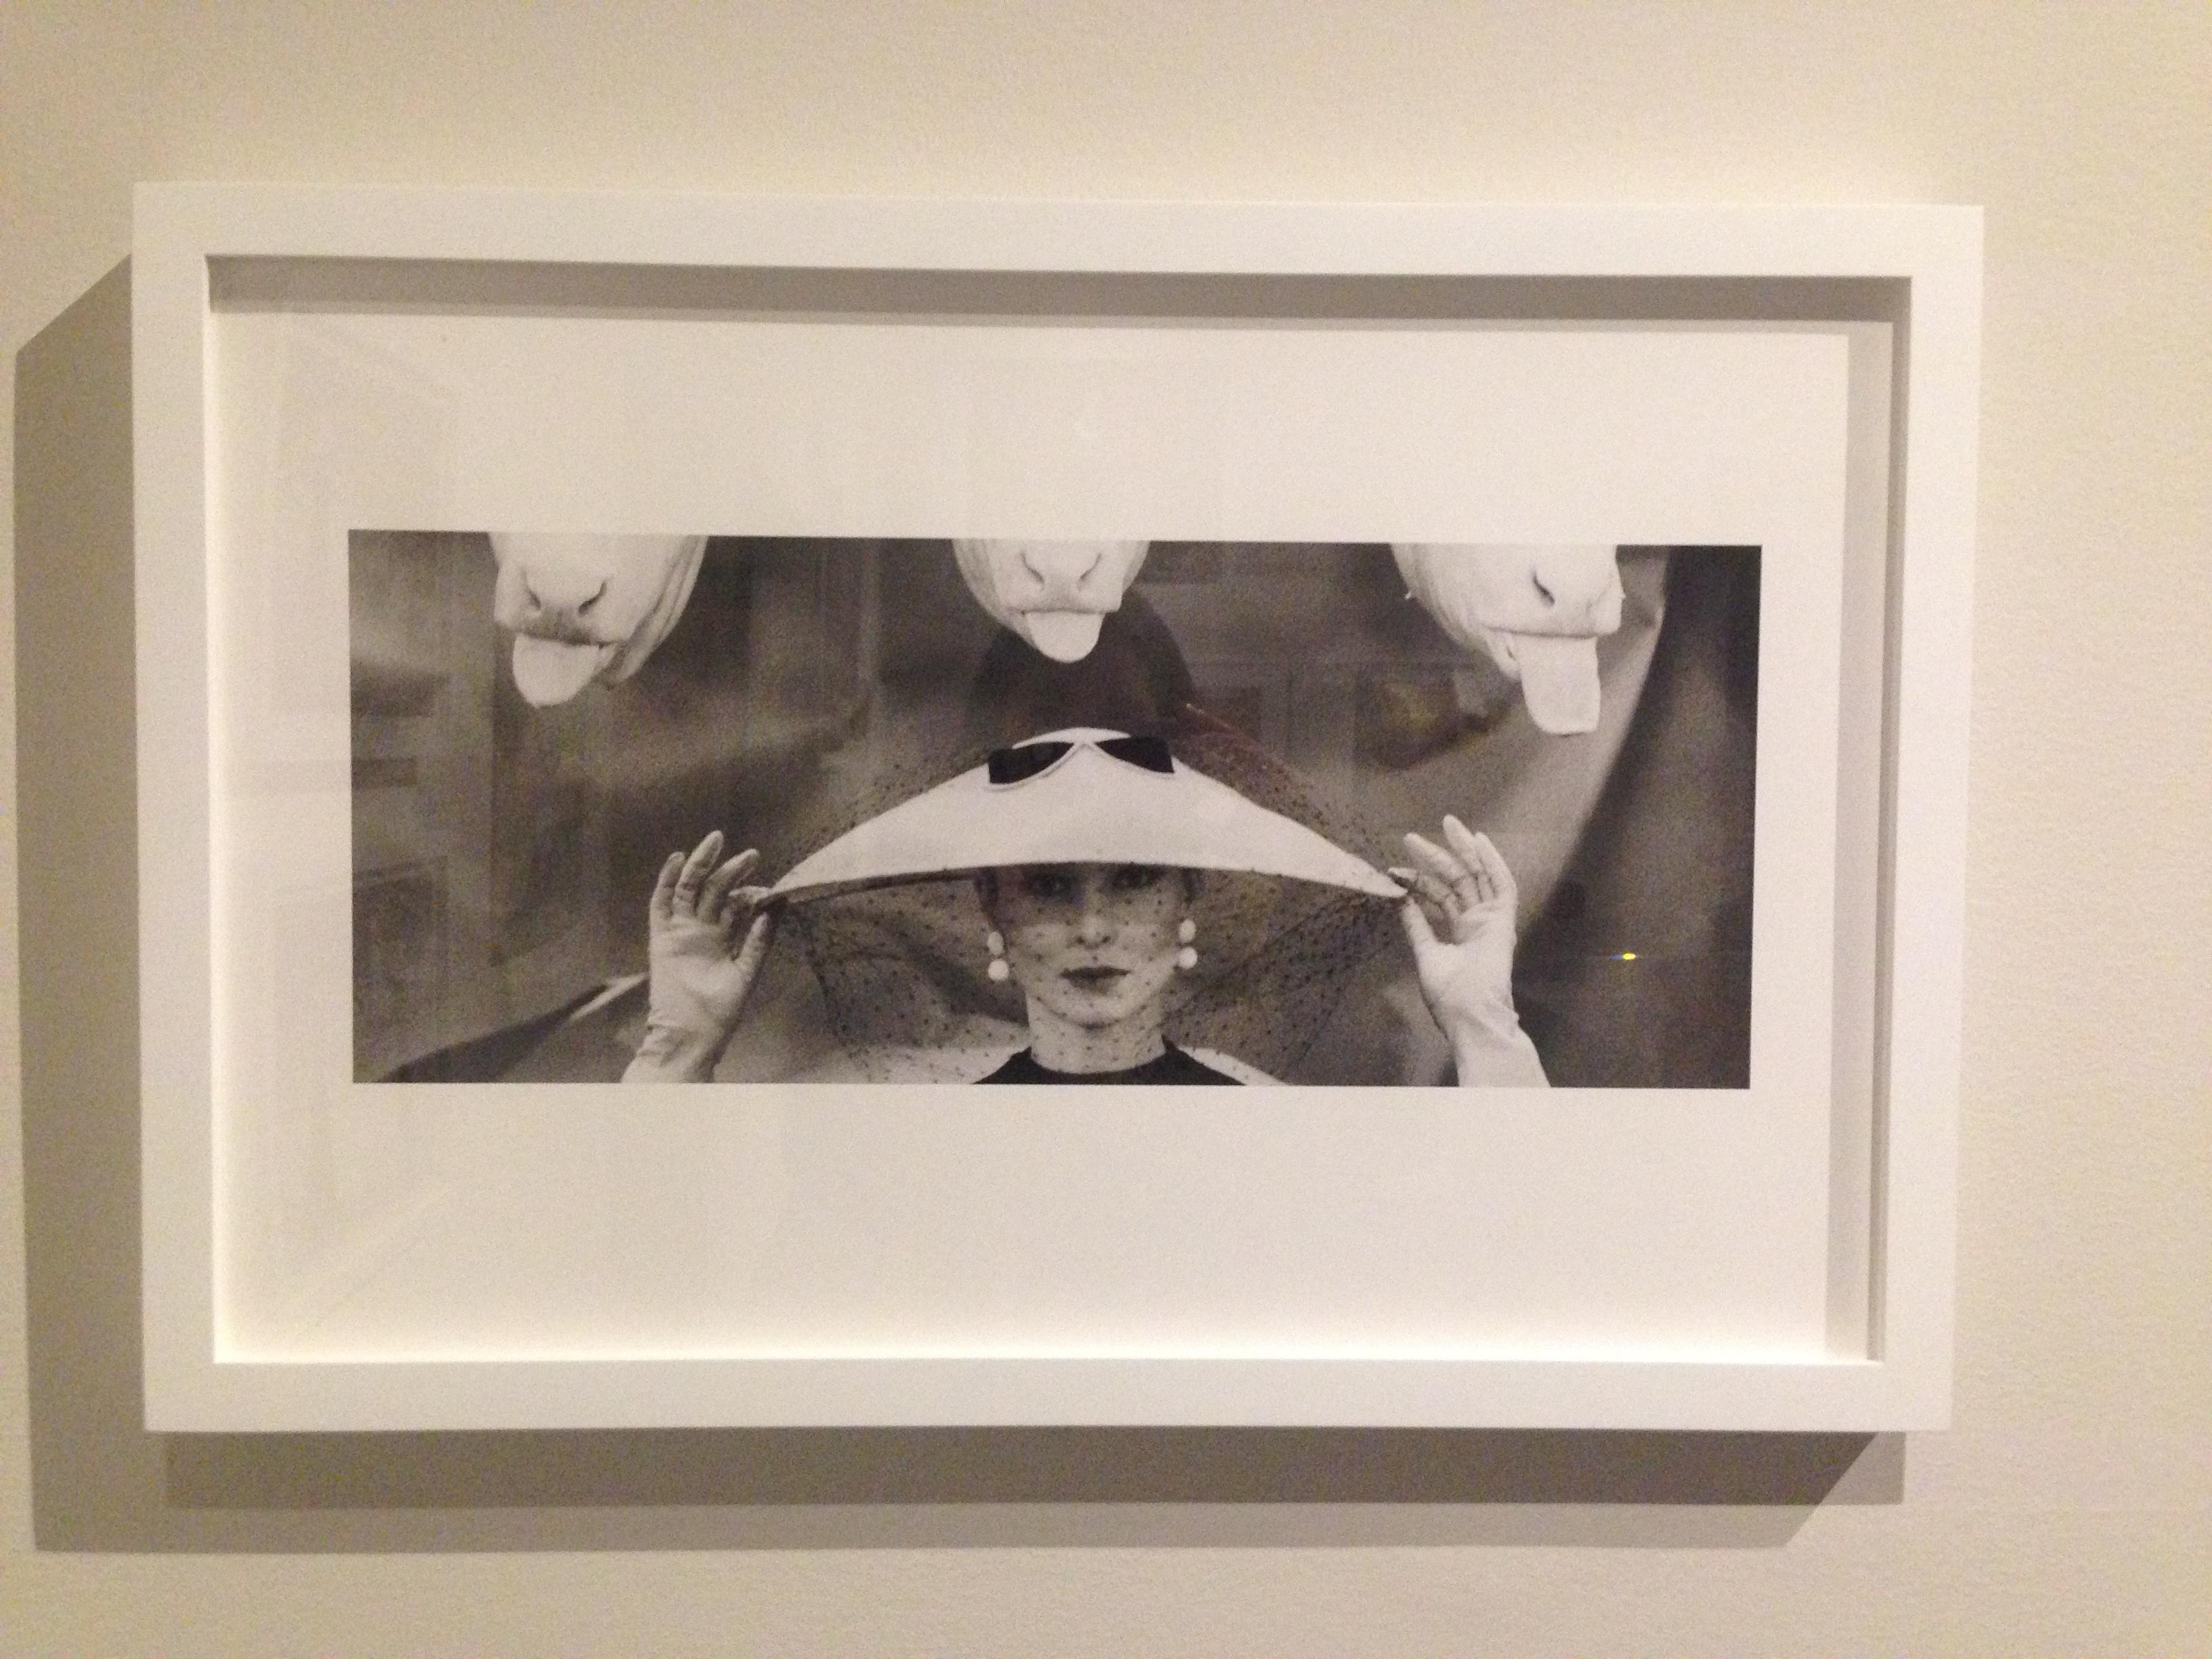 photo-guy-bourdin-mode-vogue-annees70-exposition-somerset-house